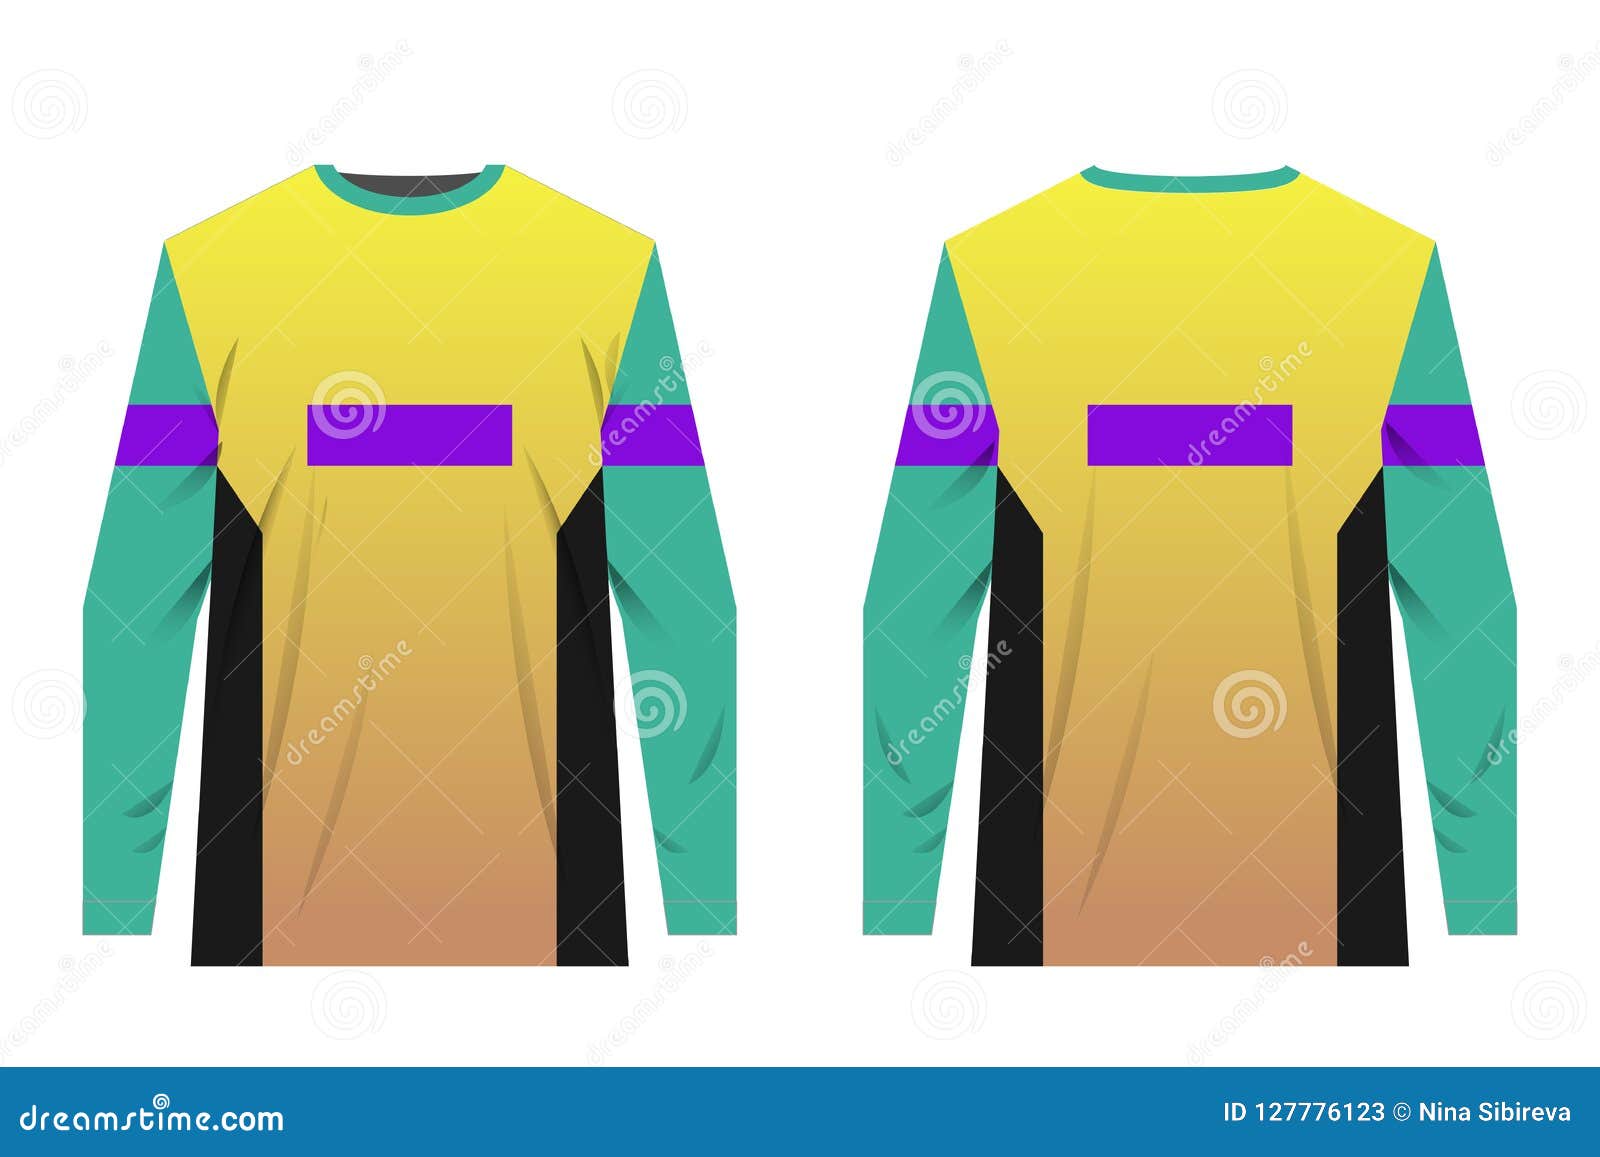 Jersey templates design stock vector. Illustration of sublimation ...